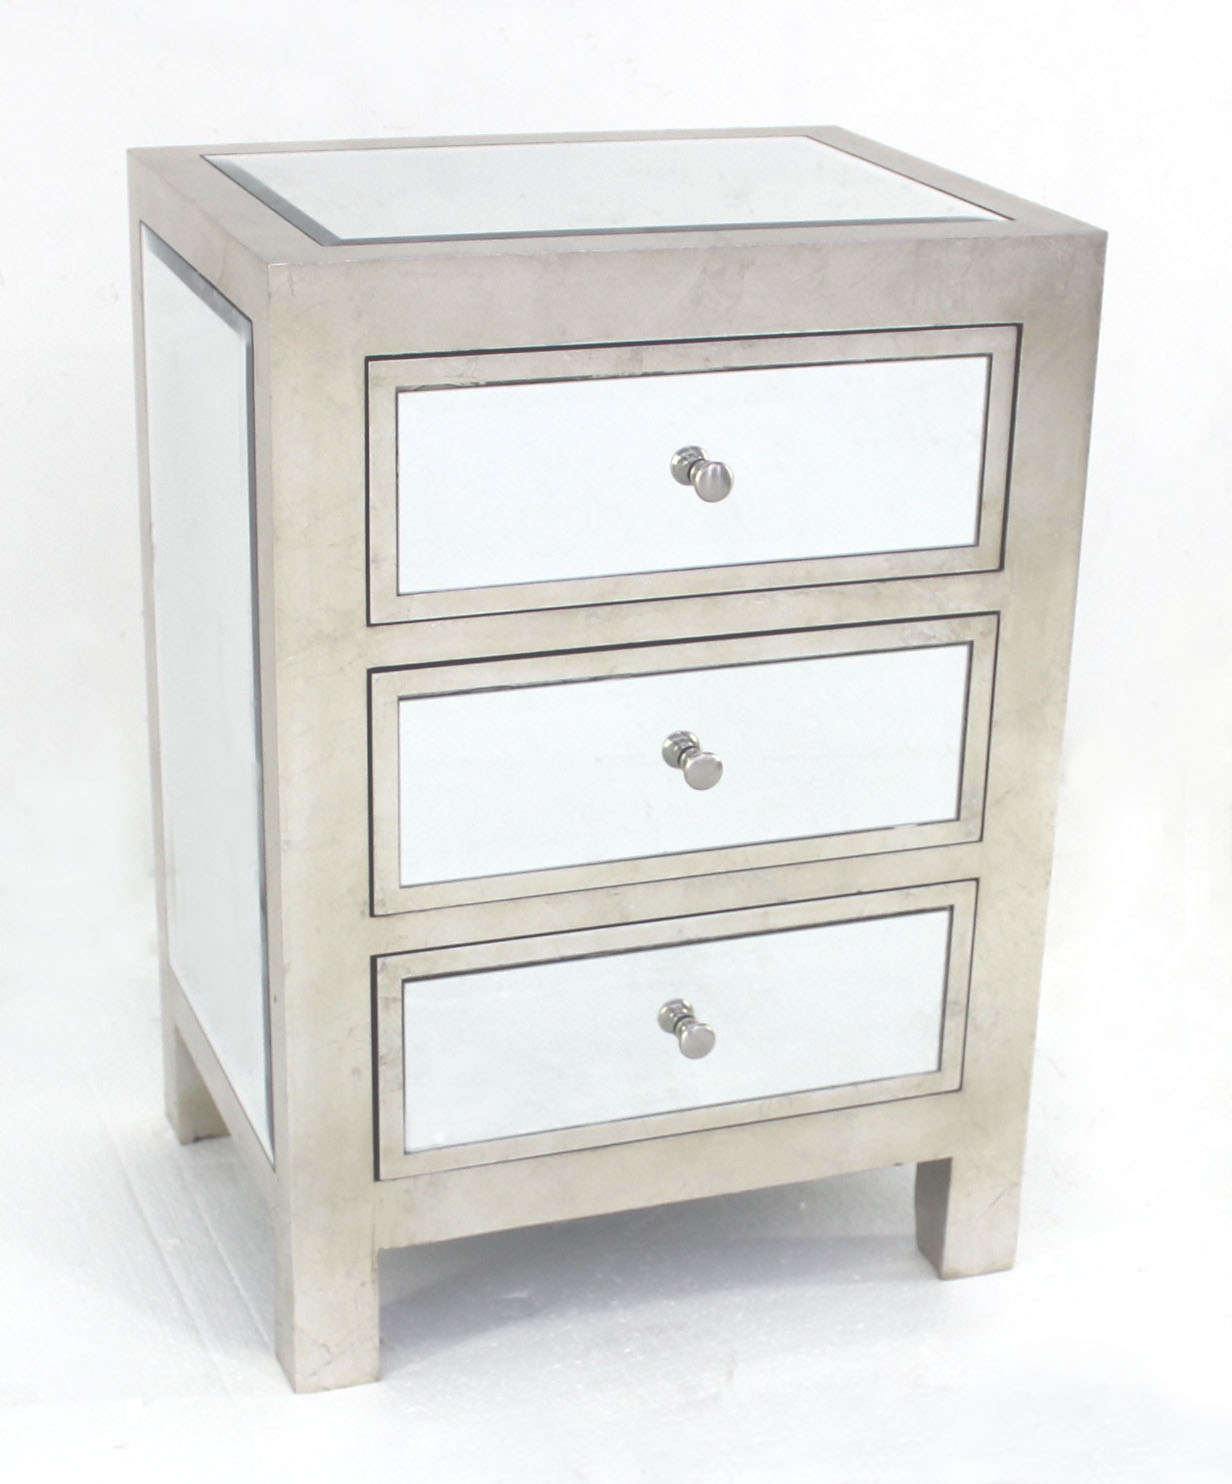 16" x 20.25" x 28.5" Silver, 3 Drawer, Modern, Mirrored - End Table